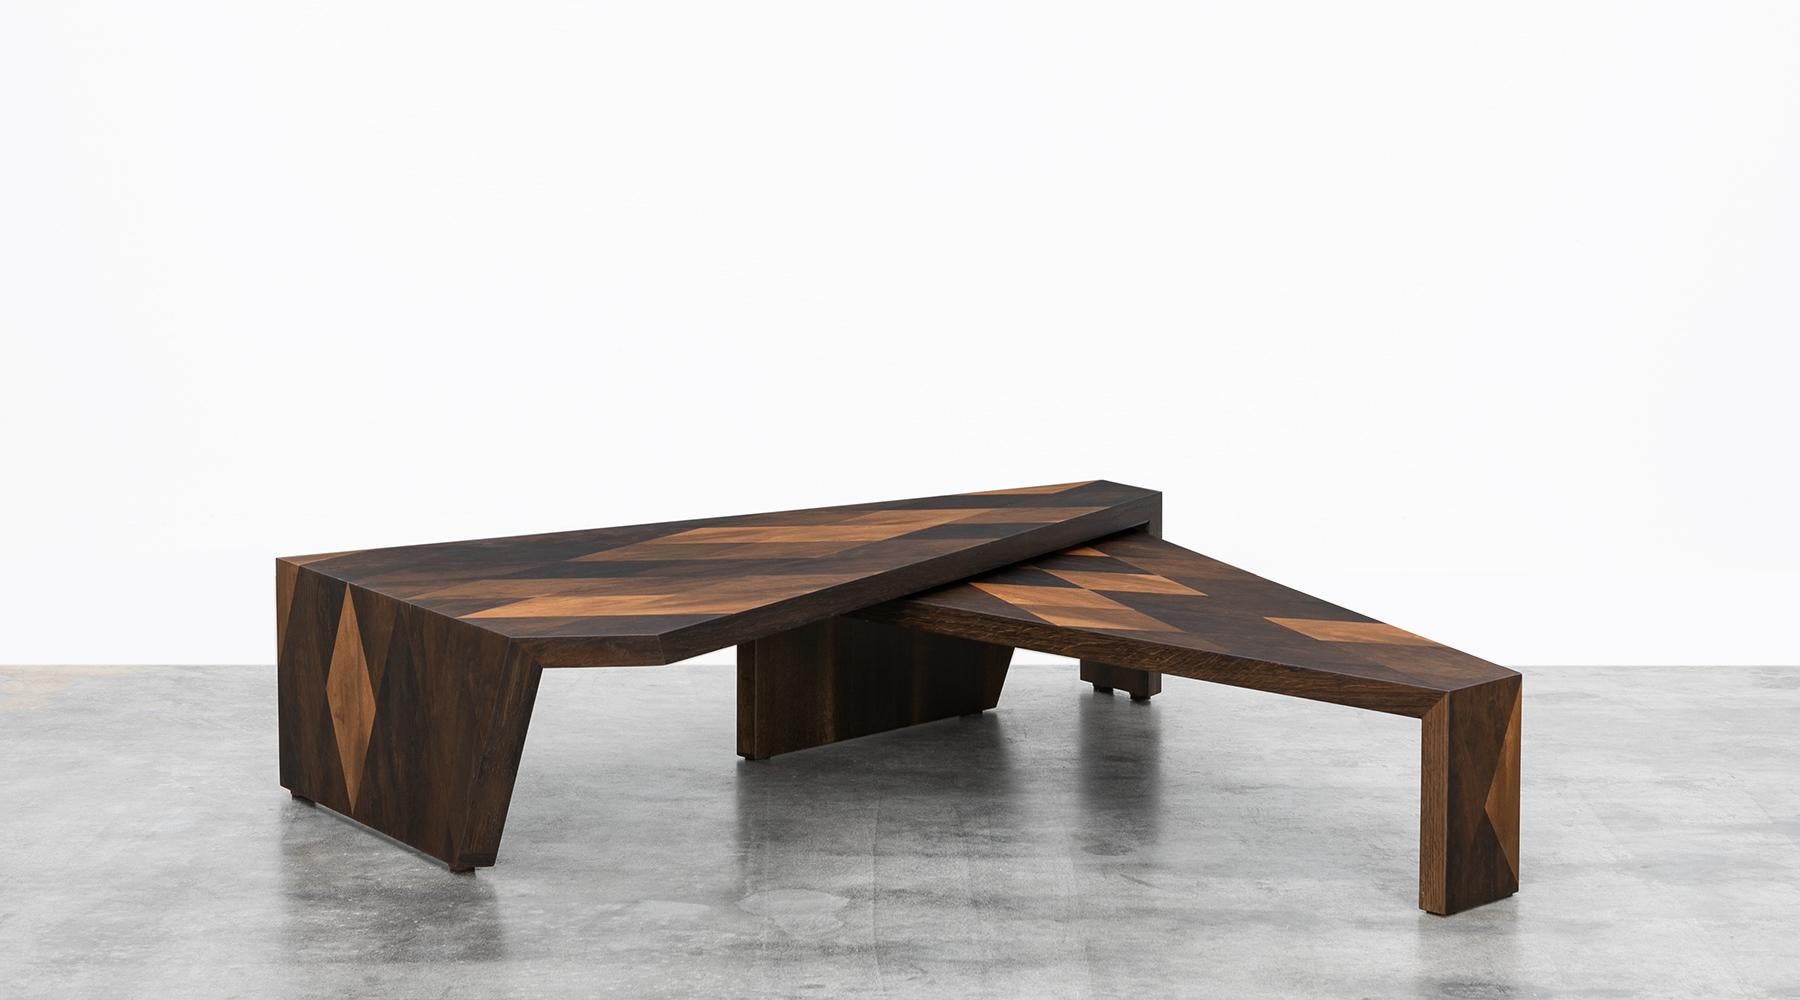 German Contemporary Smoked Oak Coffee Table by Johannes Hock 'a' For Sale